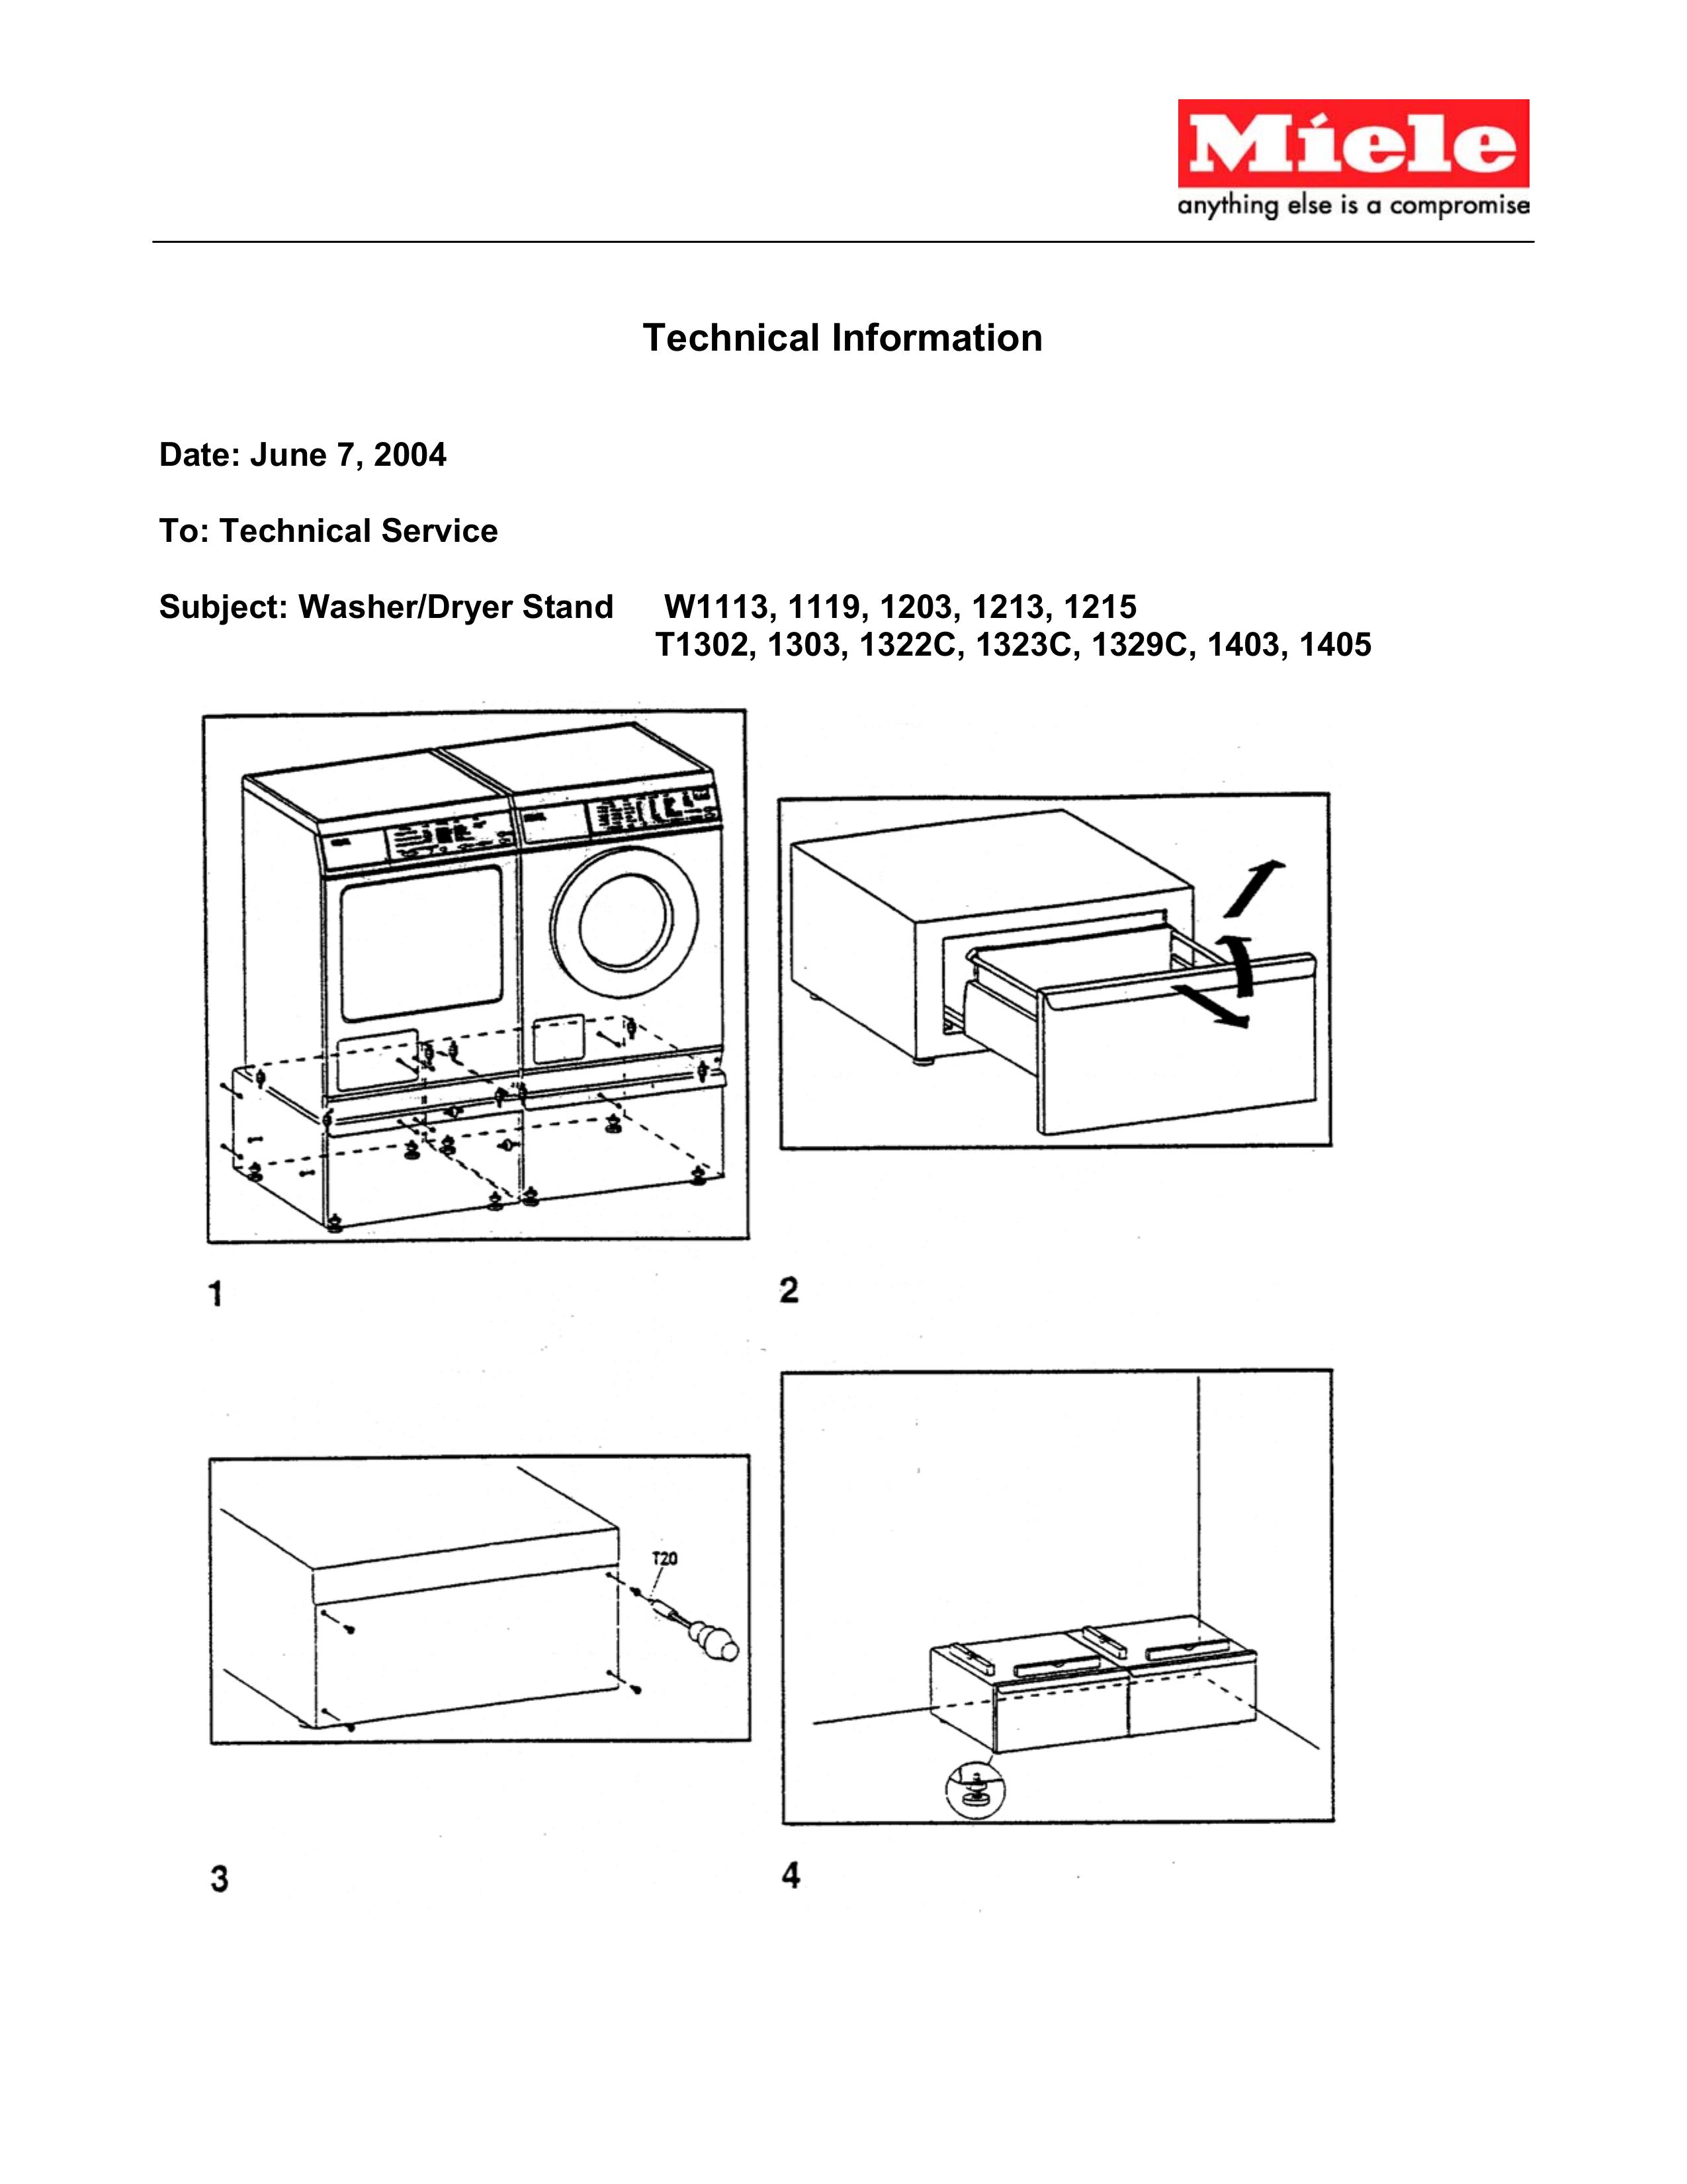 Miele T1405 Washer Accessories User Manual